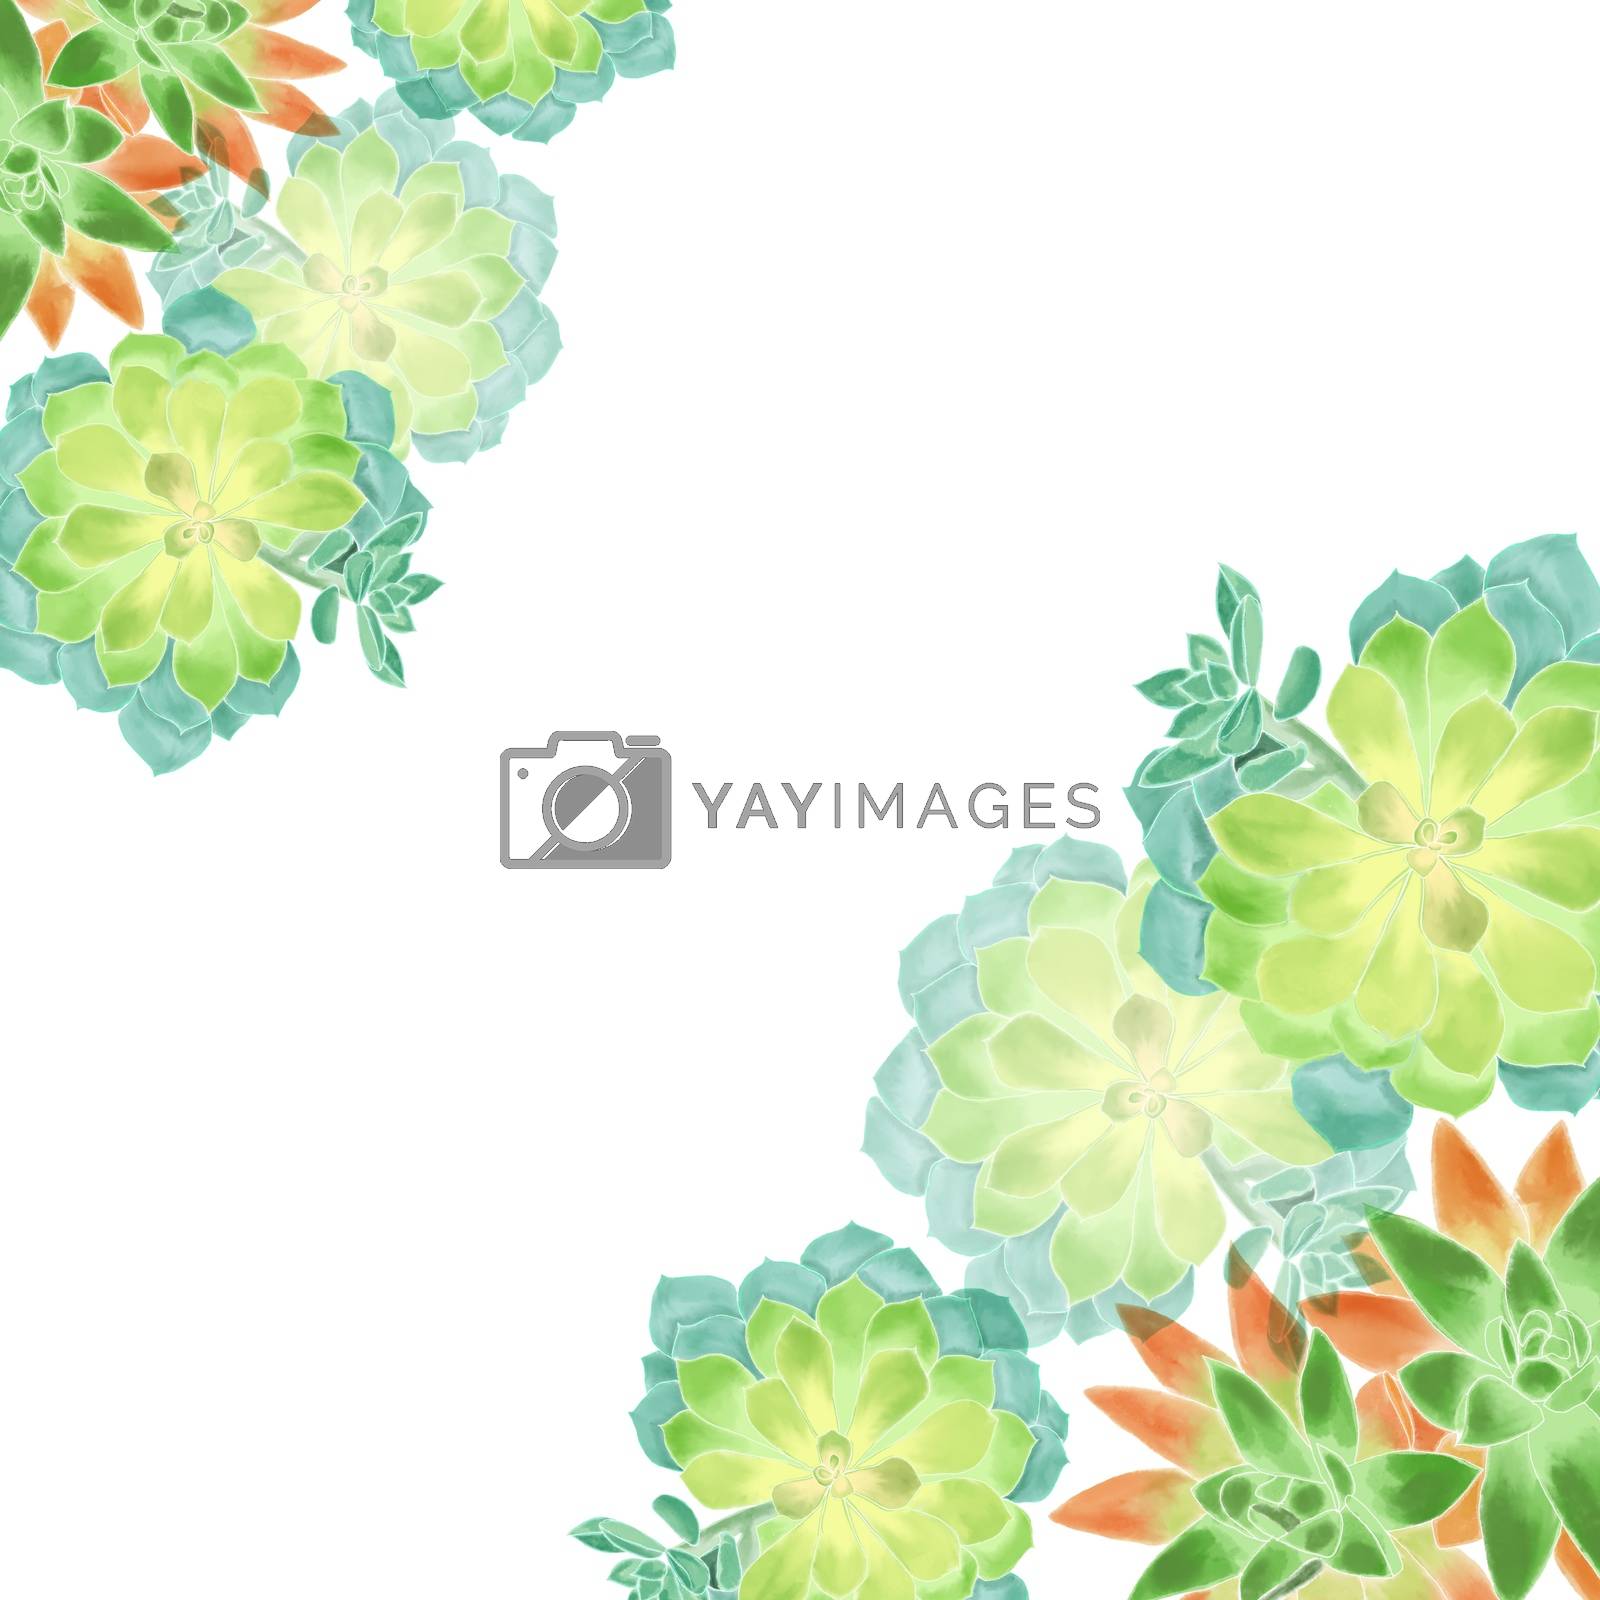 Royalty free image of illustration of Watercolor succulents  by Margolana